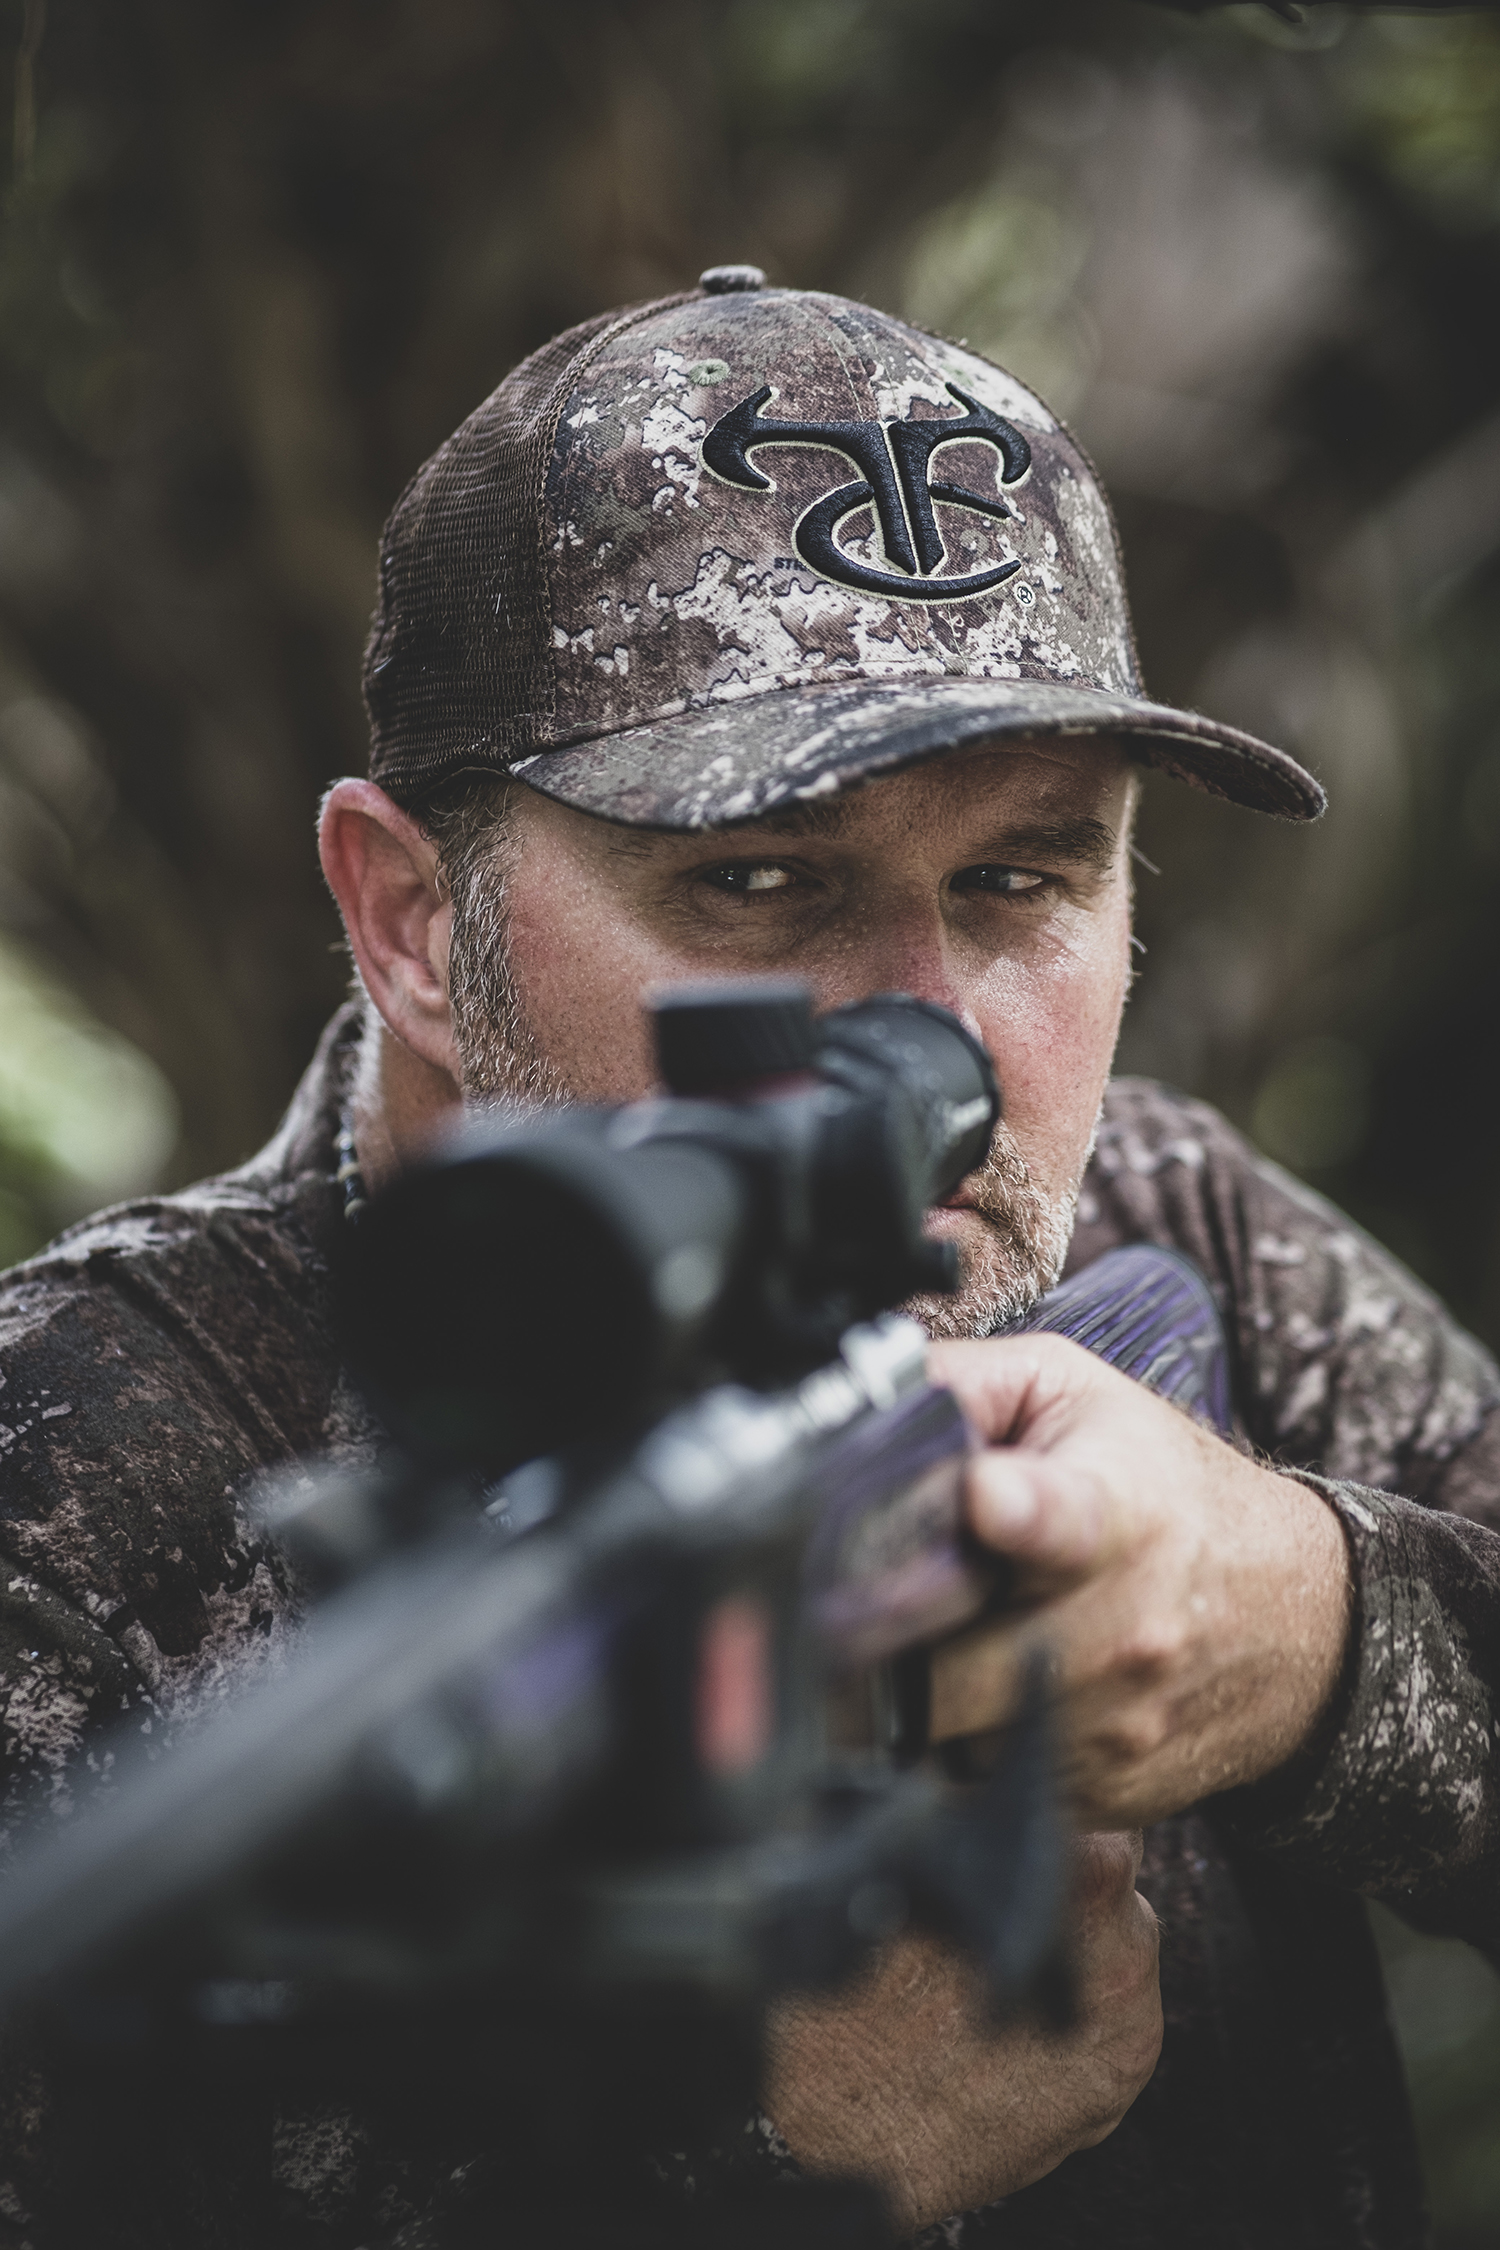 Pigman and Silencer Central Team Up to Promote Suppressors for Hunting